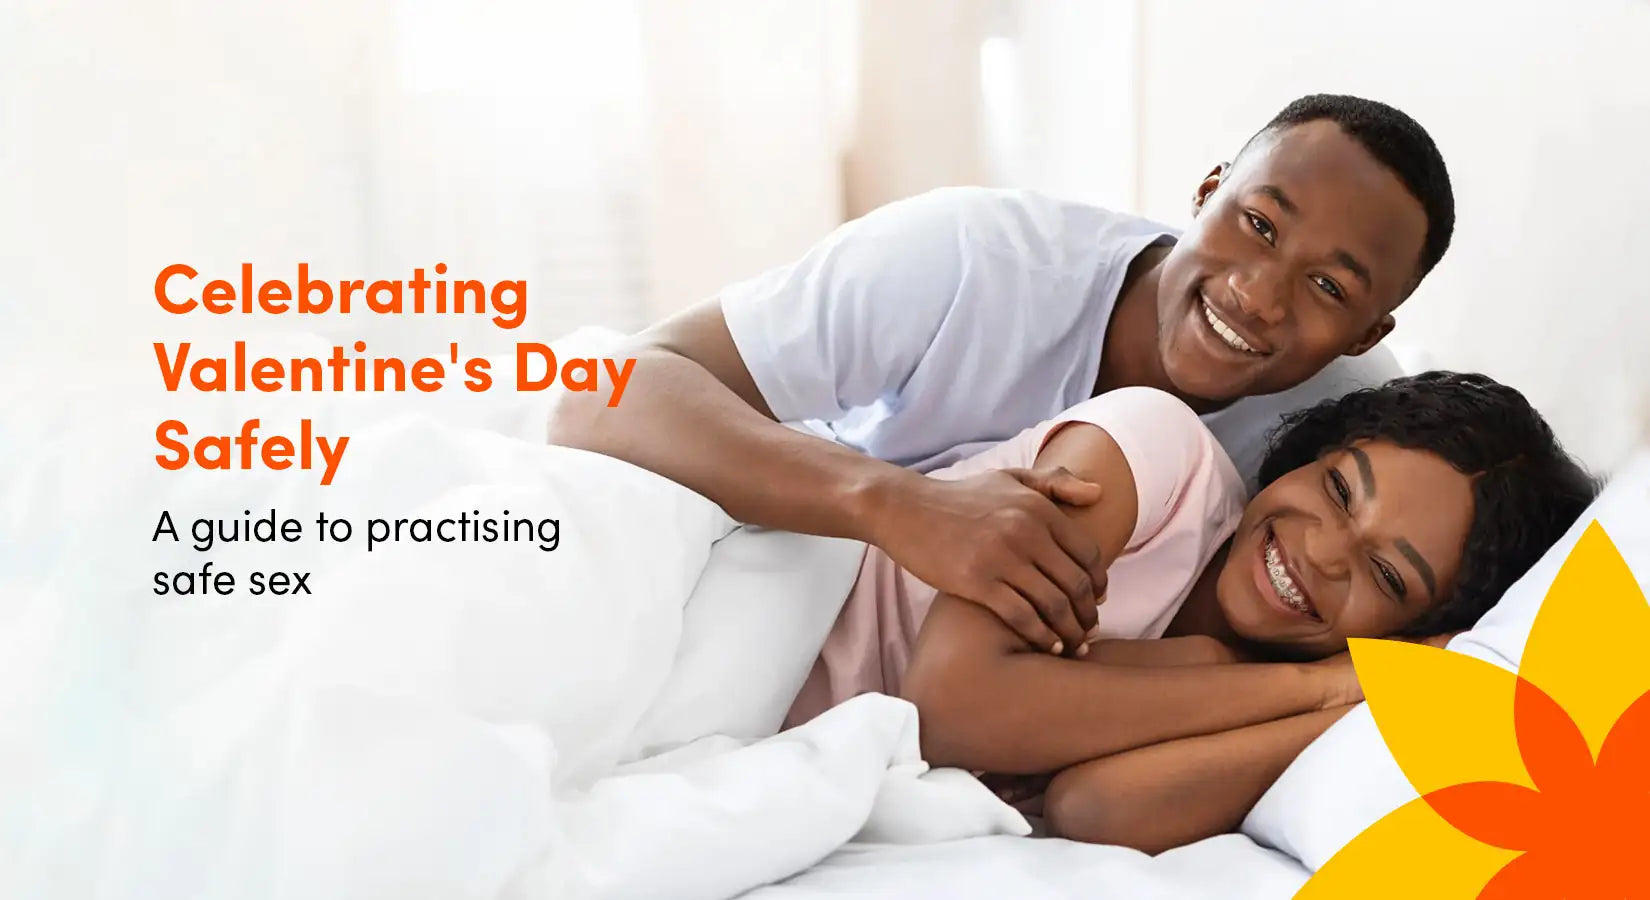 An image promoting promoting safe sex practices for Valentine's Day with a smiling couple lying in bed.